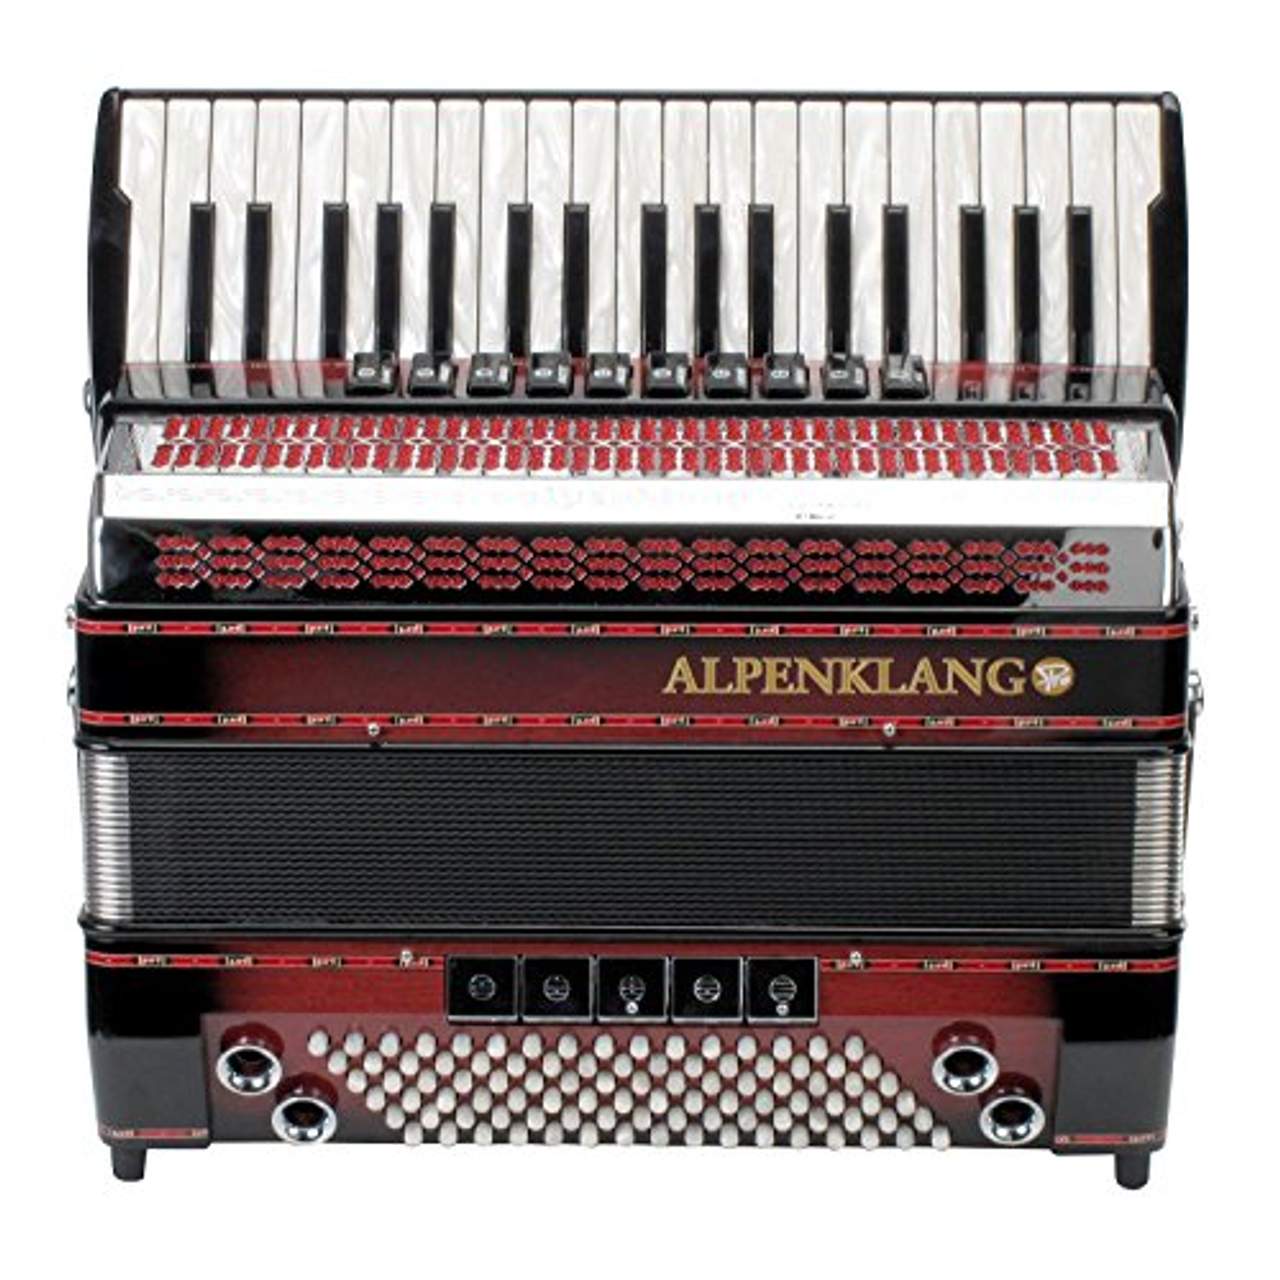 Alpenklang Pro Akkordeon IV 96 MHR Shadow Red